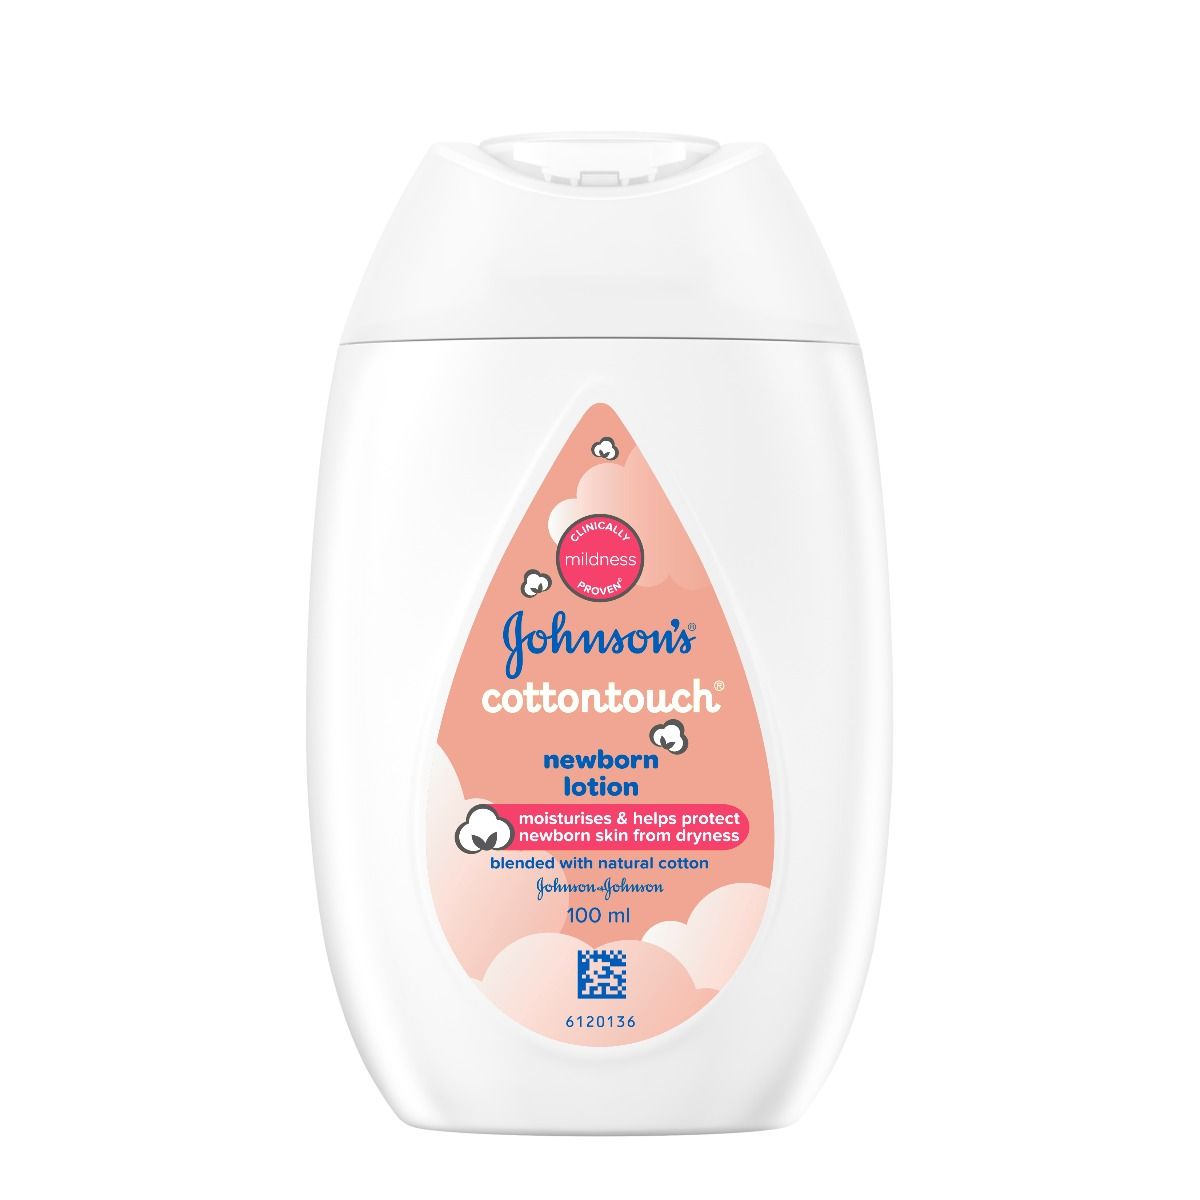 Buy Johnson's Cottontouch New Born Lotion, 100 ml Online